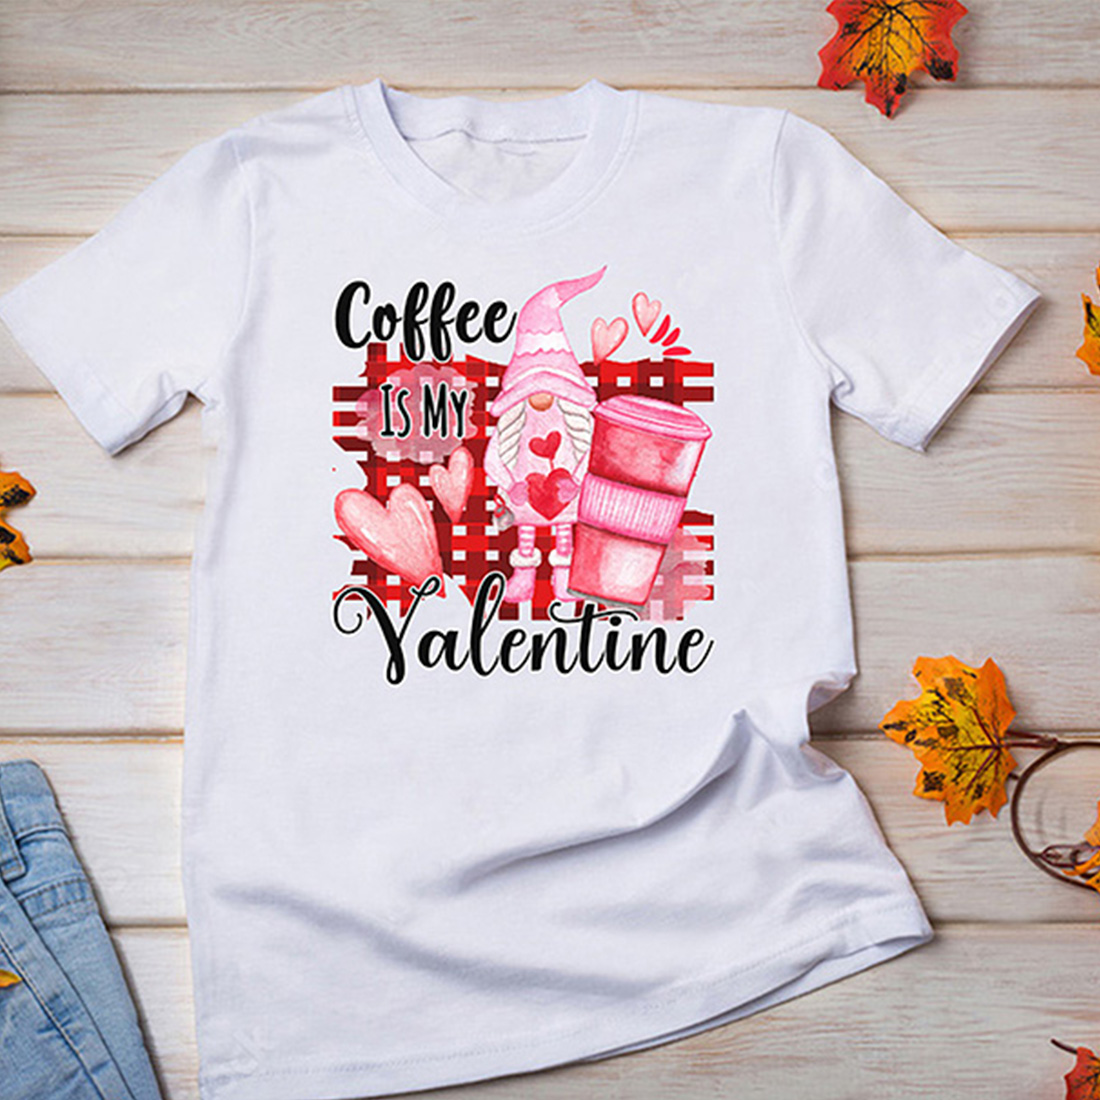 Image of a T-shirt with an enchanting print on the theme of Valentines Day